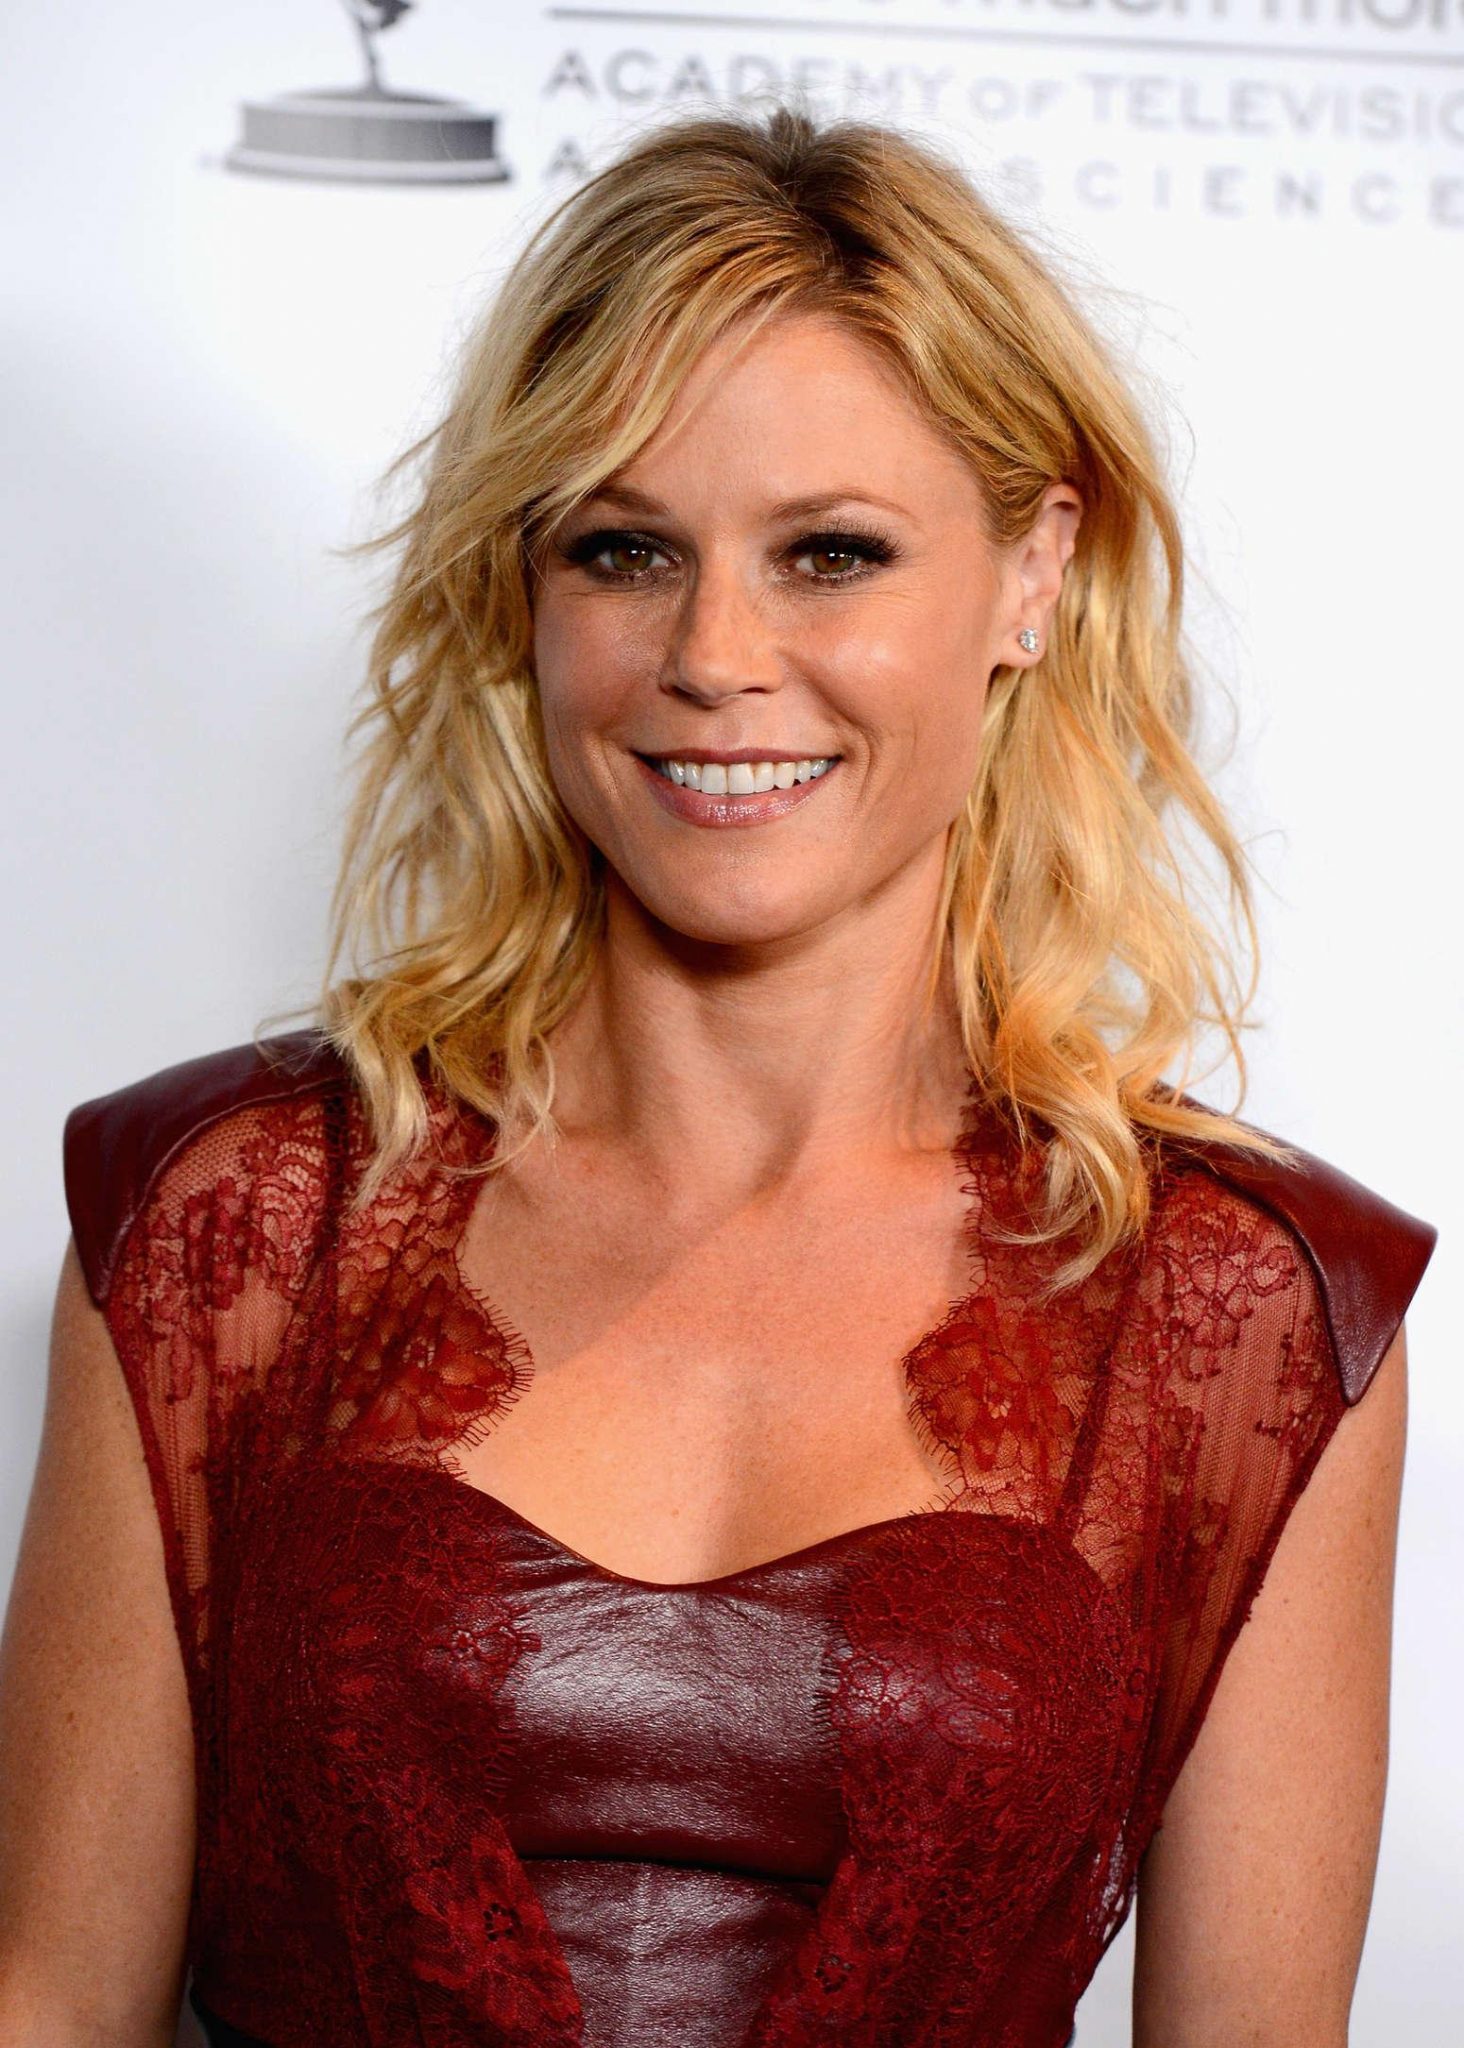 49 Julie Bowen Nude Pictures Are Sure To Keep You At The Edge Of Your Seat 84